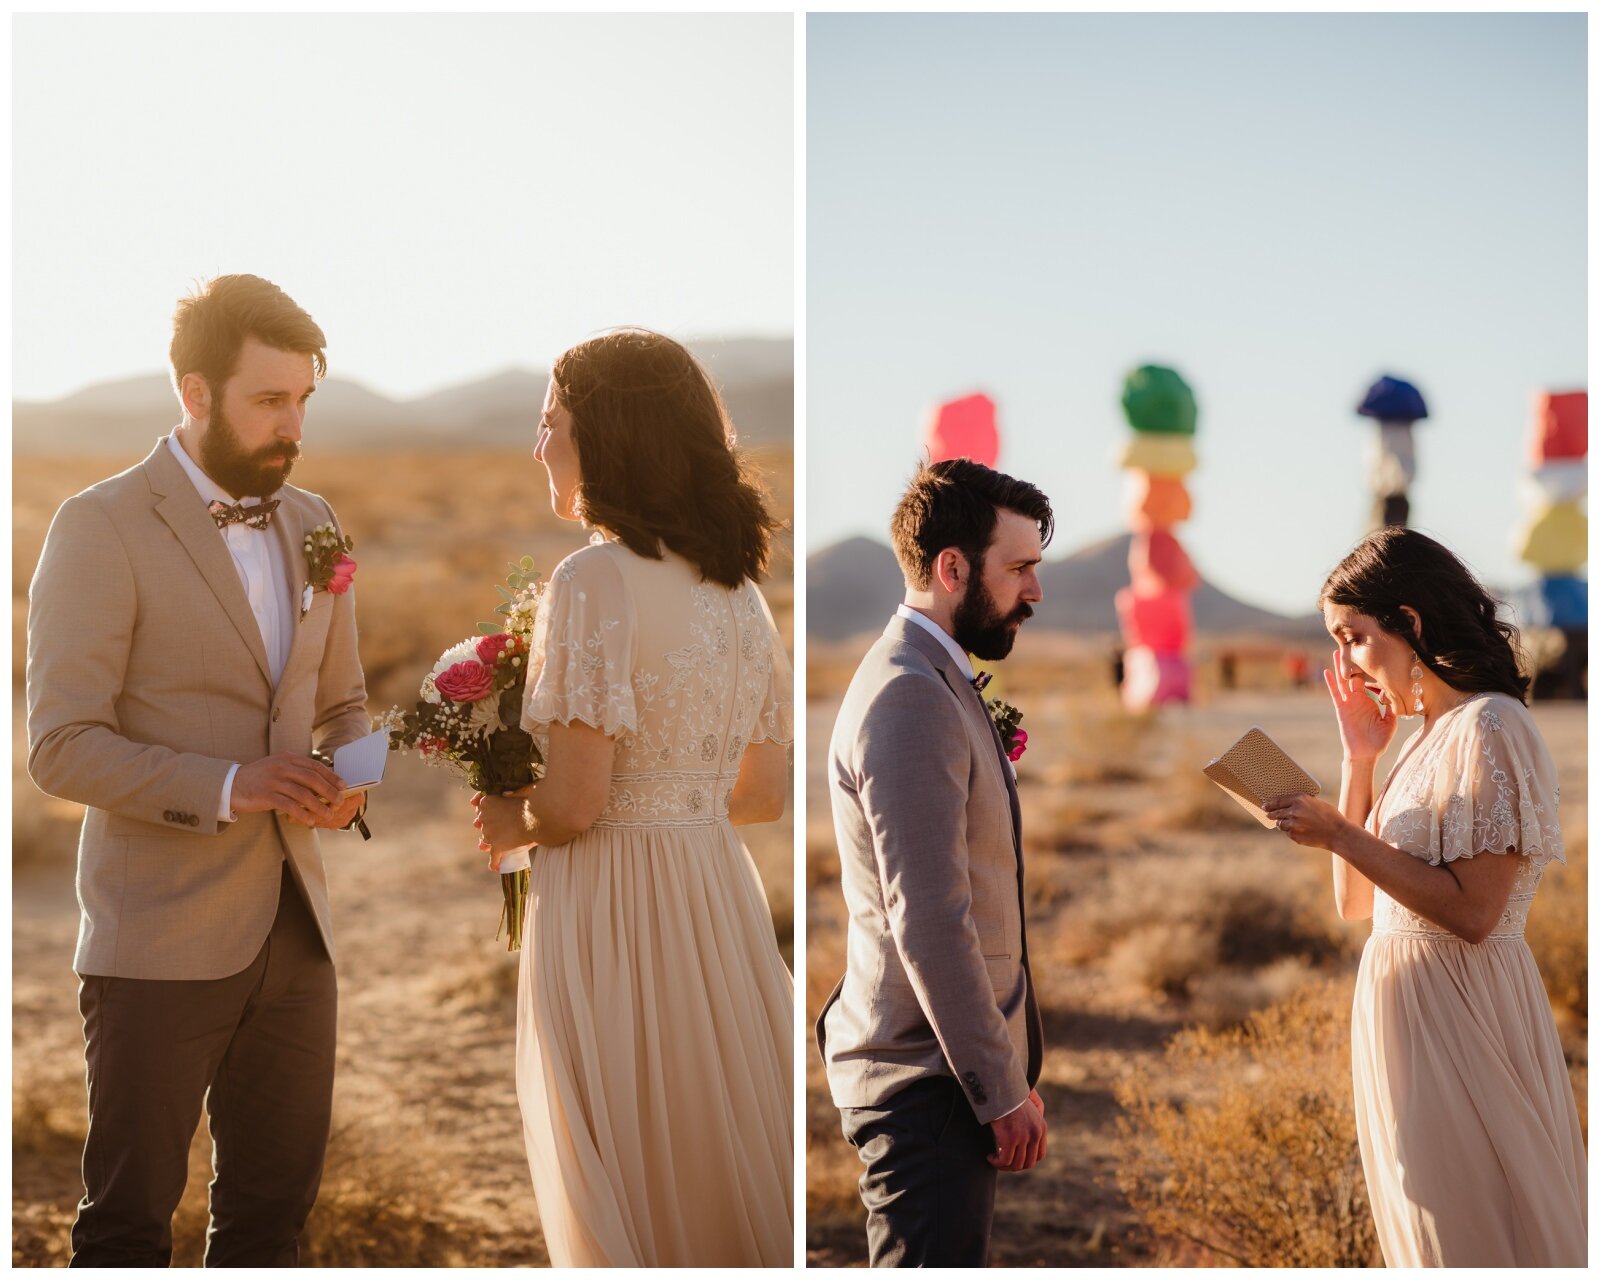 Couple Getting Married In 7 magic Mountains